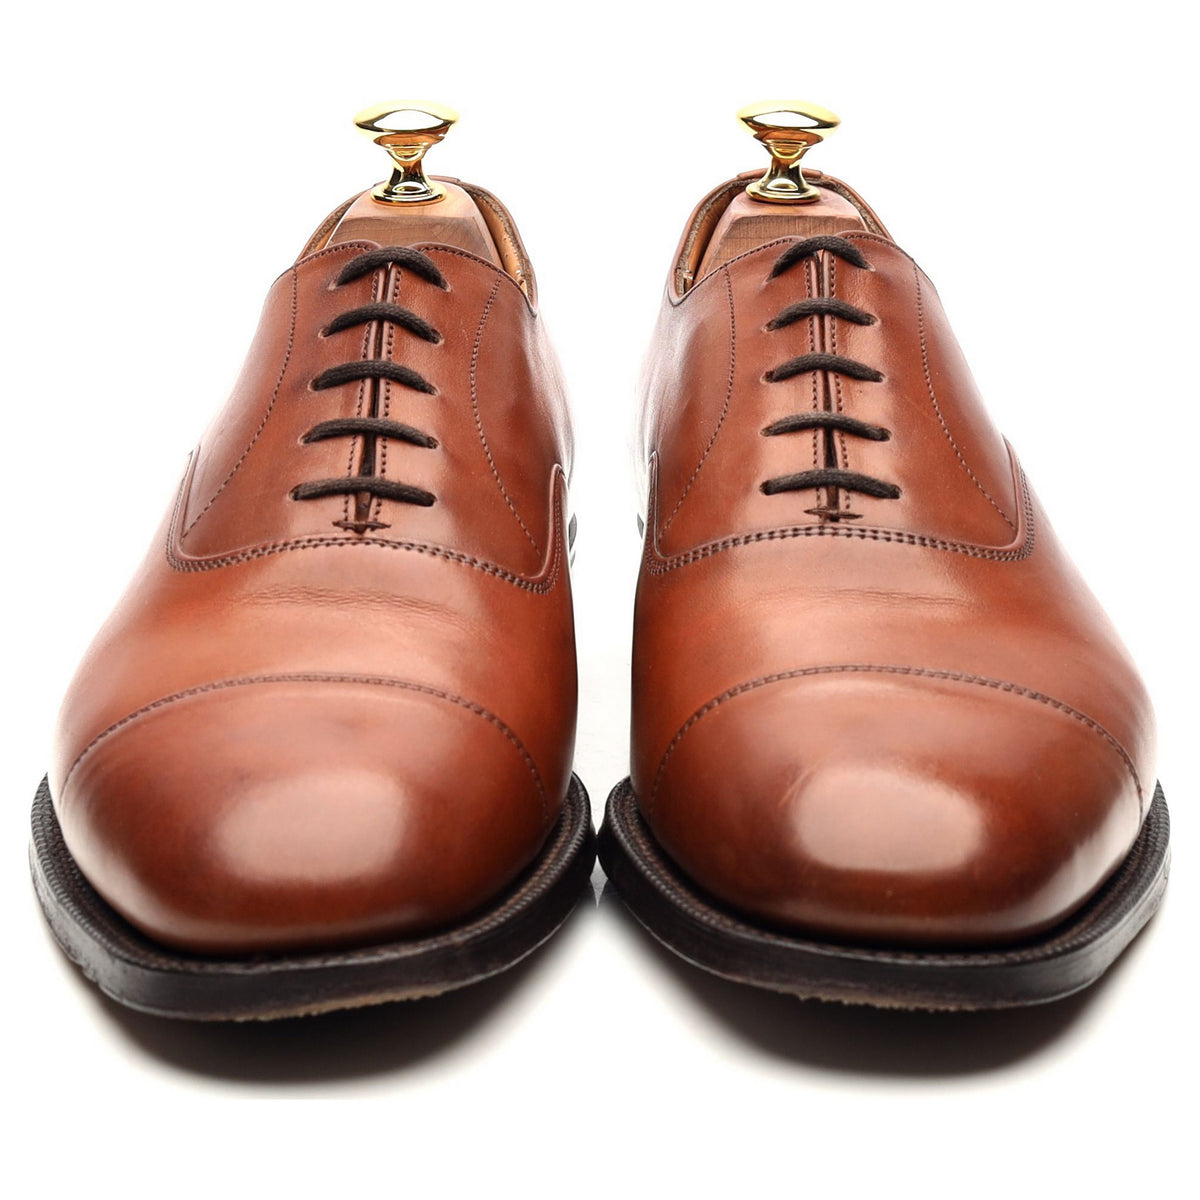 &#39;Canberra&#39; Tan Brown Leather Oxford UK 9 F